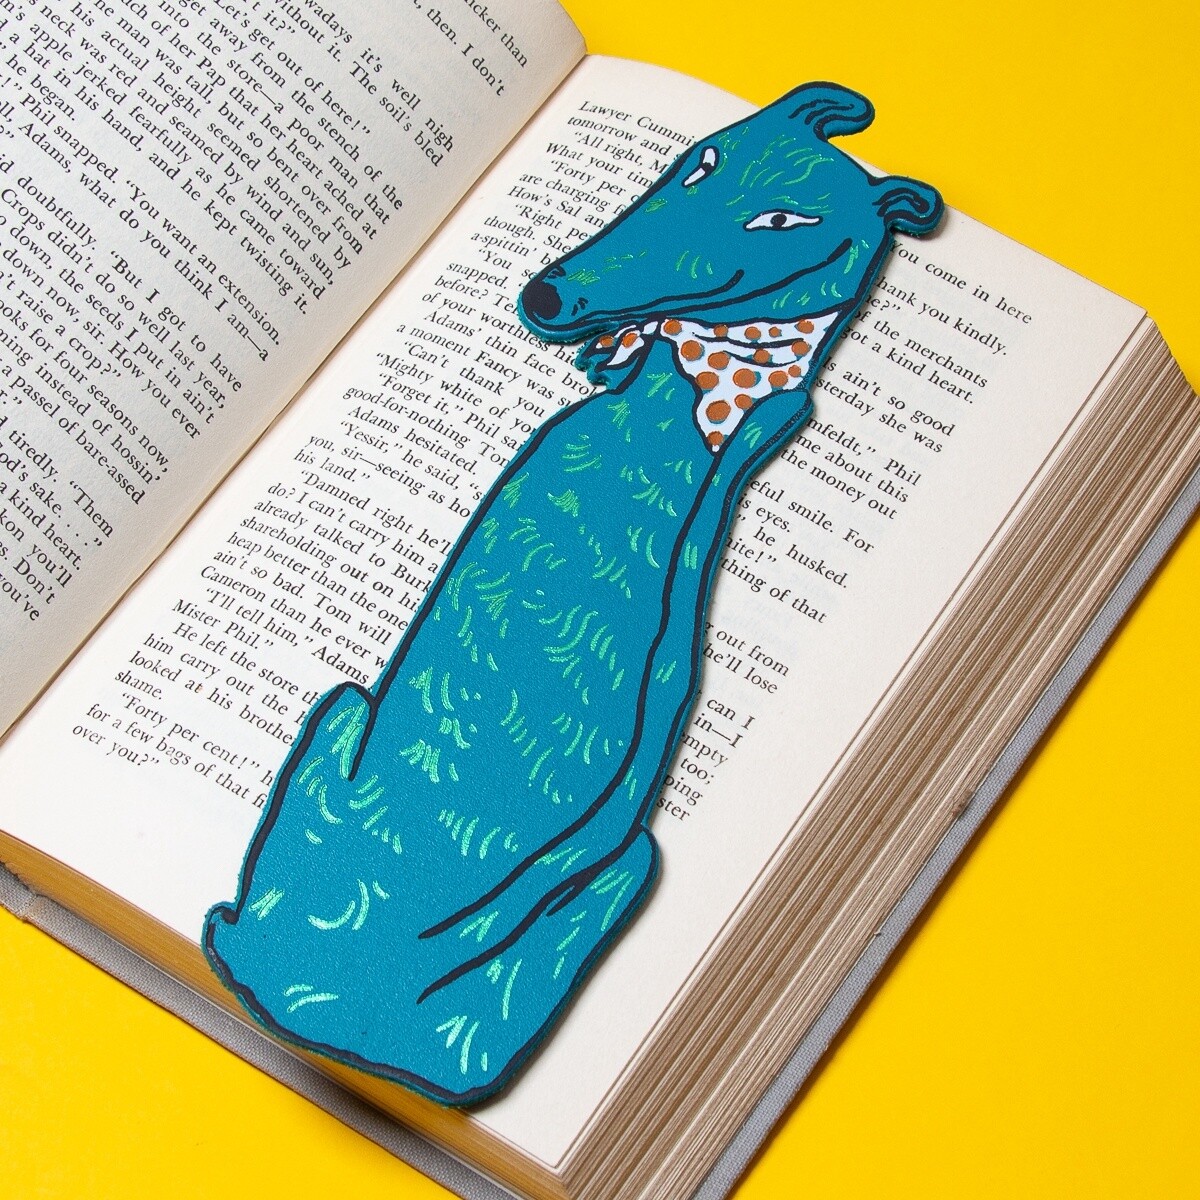 Dog Leather Bookmark - Turquoise by Ark Colour Design